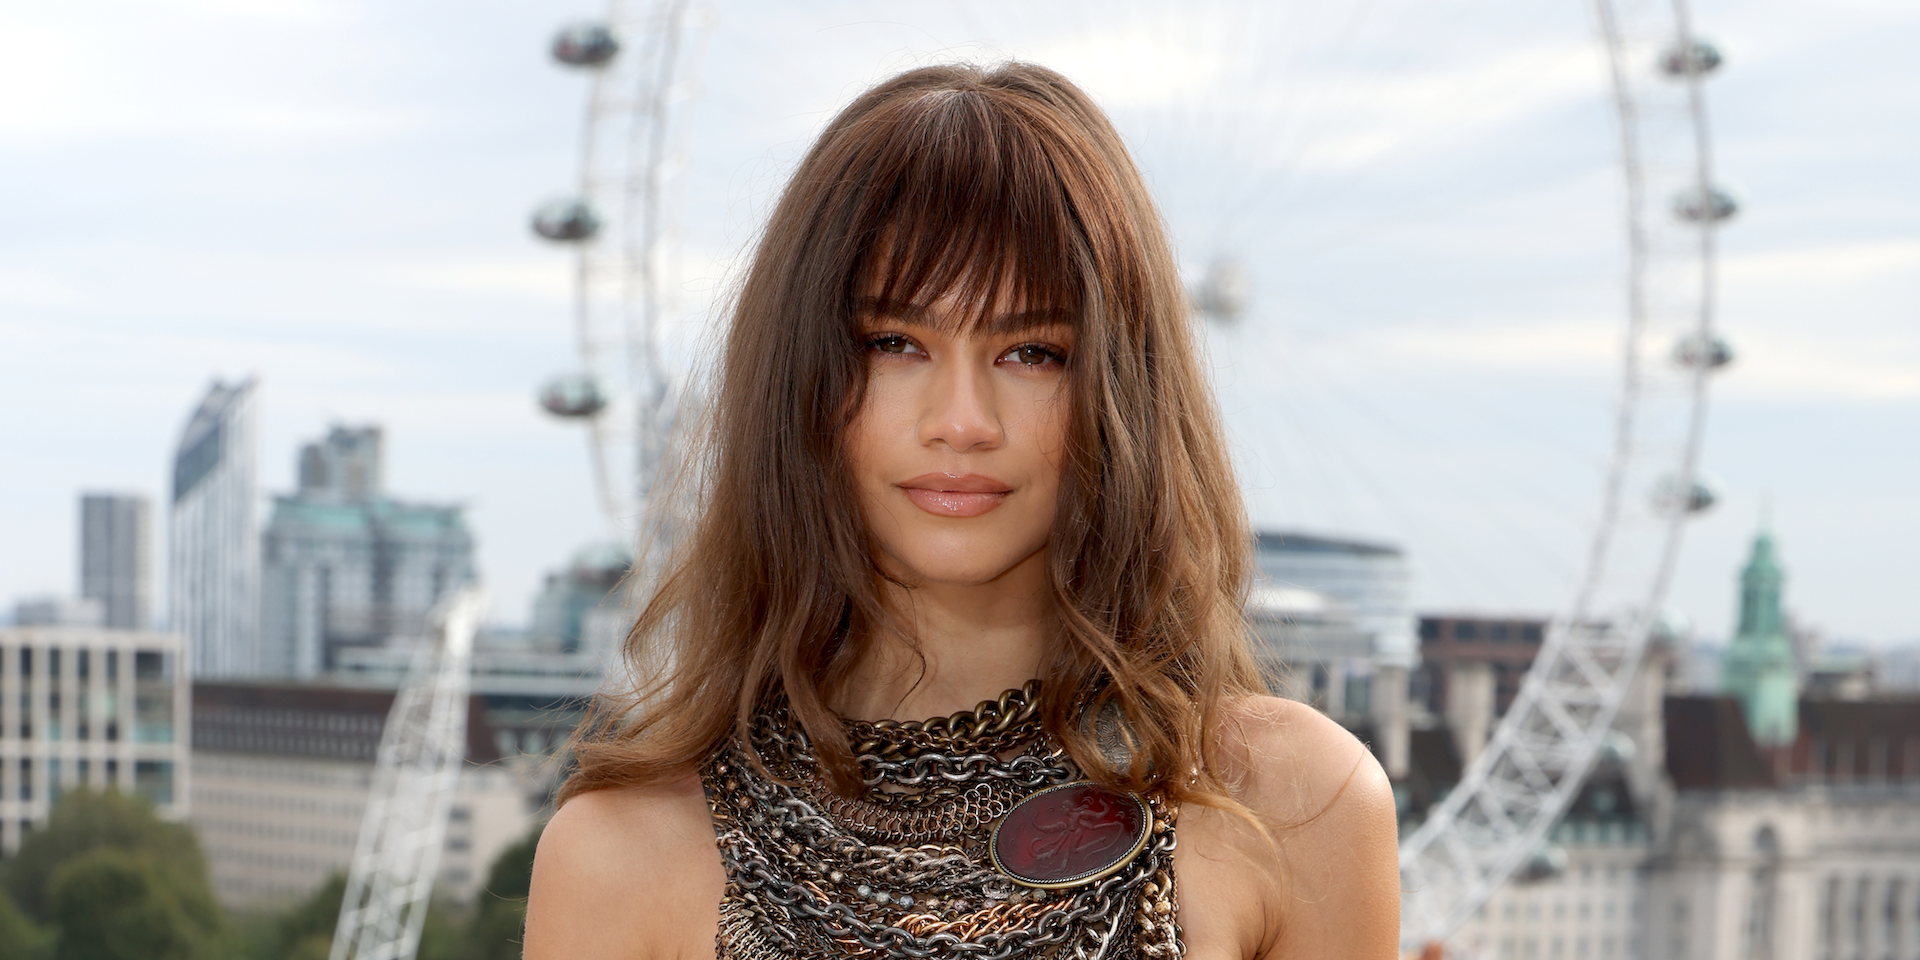 Zendaya joins the corset trend in stunning off-the shoulder suit while in  Paris